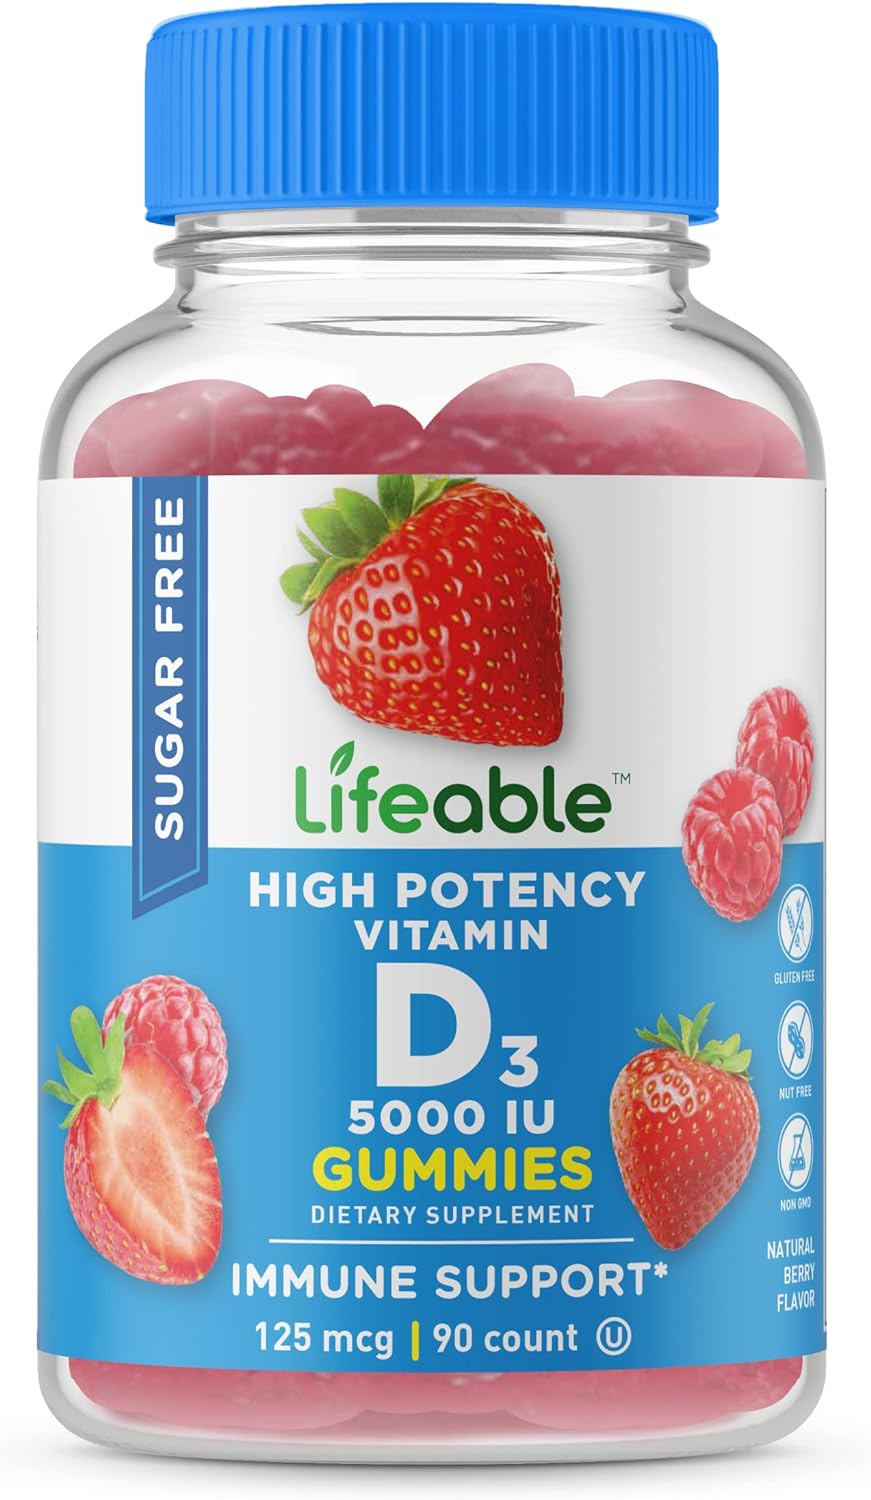 Lifeable Sugar Free Vitamin D 5000 IU - Great Tasting Natural Flavor Gummy Supplement - Gluten Free Vegetarian GMO-Free Chewable - for Immune Support and Bone Health - for Adults - 90 Gummies